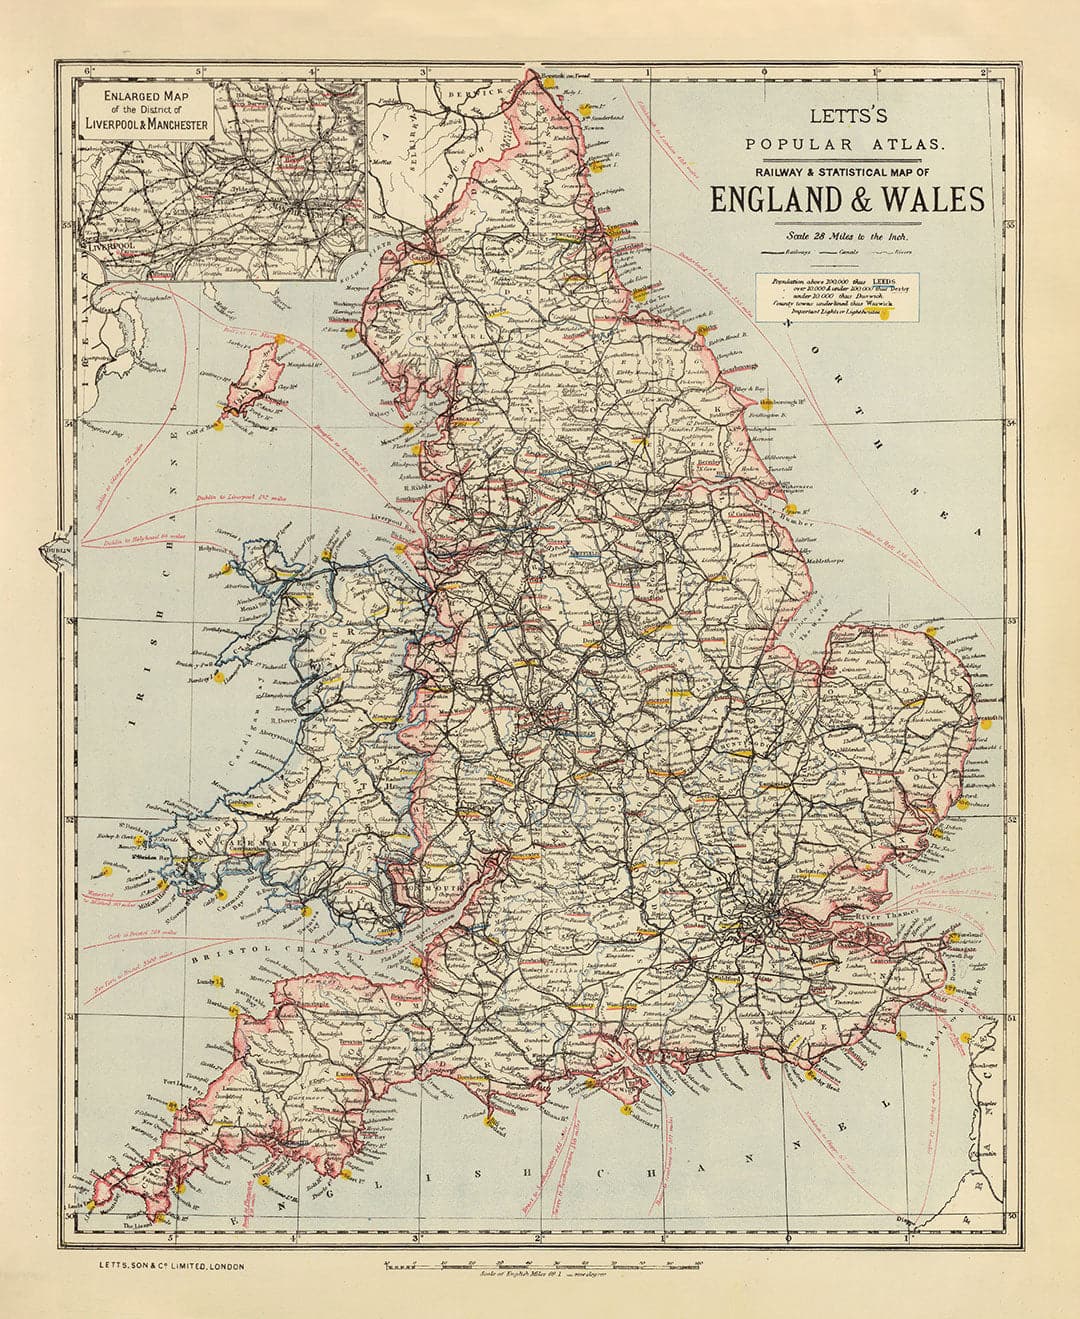 Letts's railway &amp; statistical map of England &amp; Wales, 1883